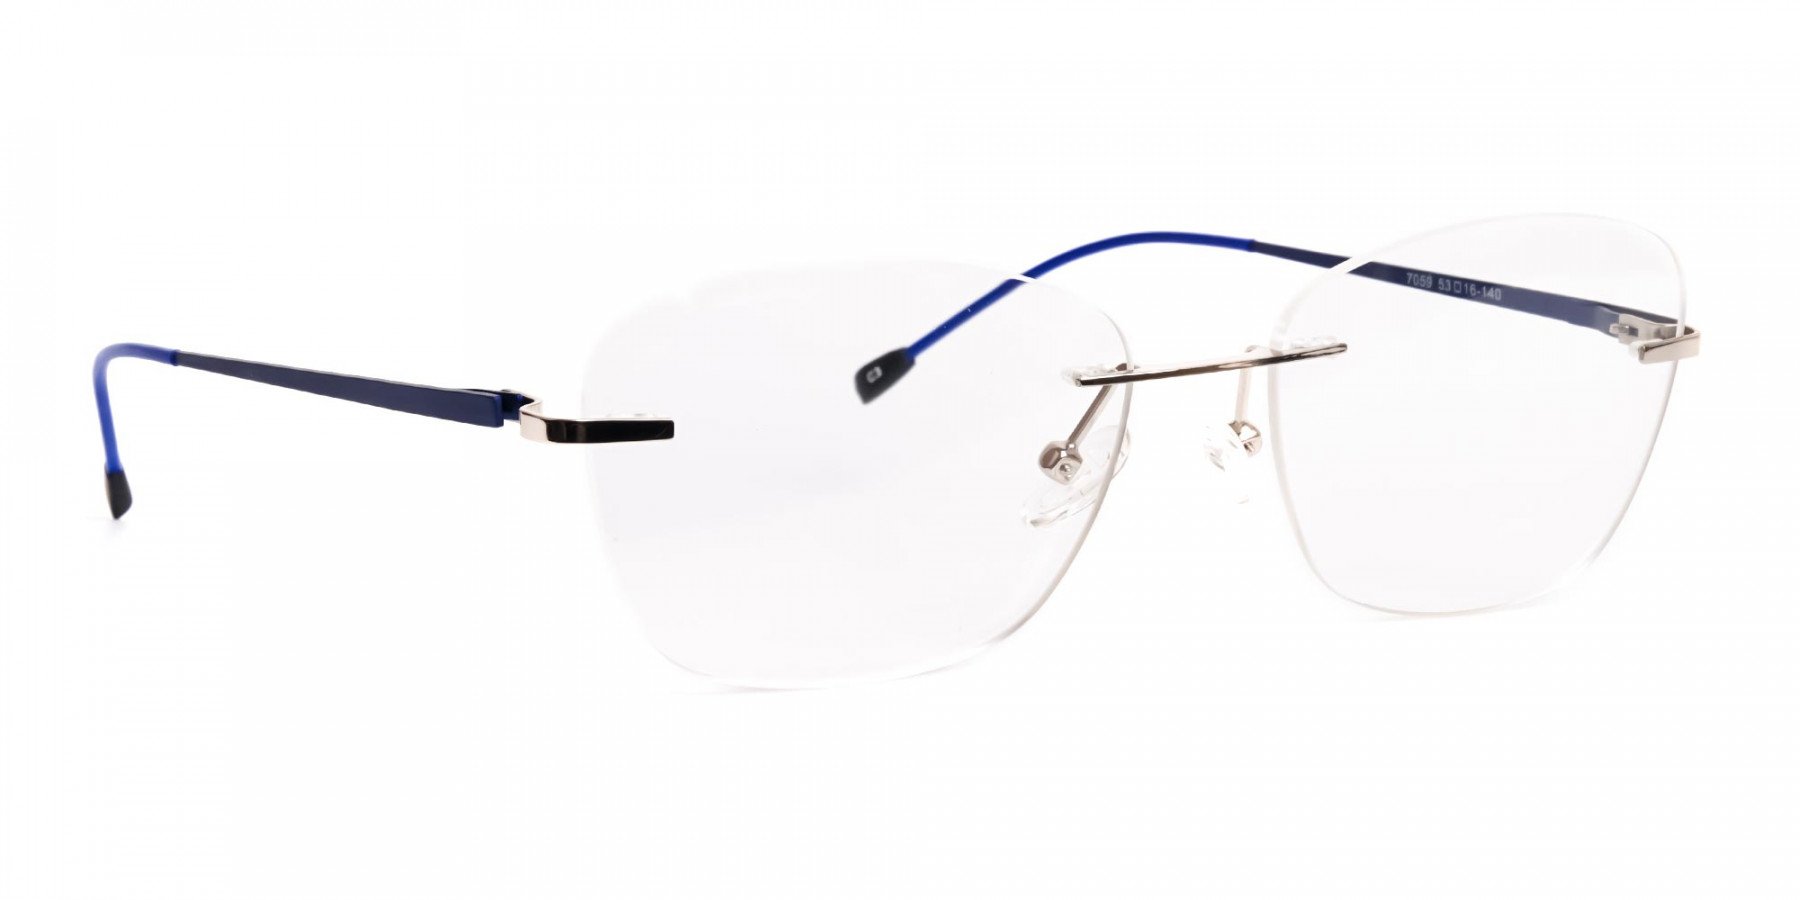 silver-and-blue-cateye-rimless-glasses-frames-1